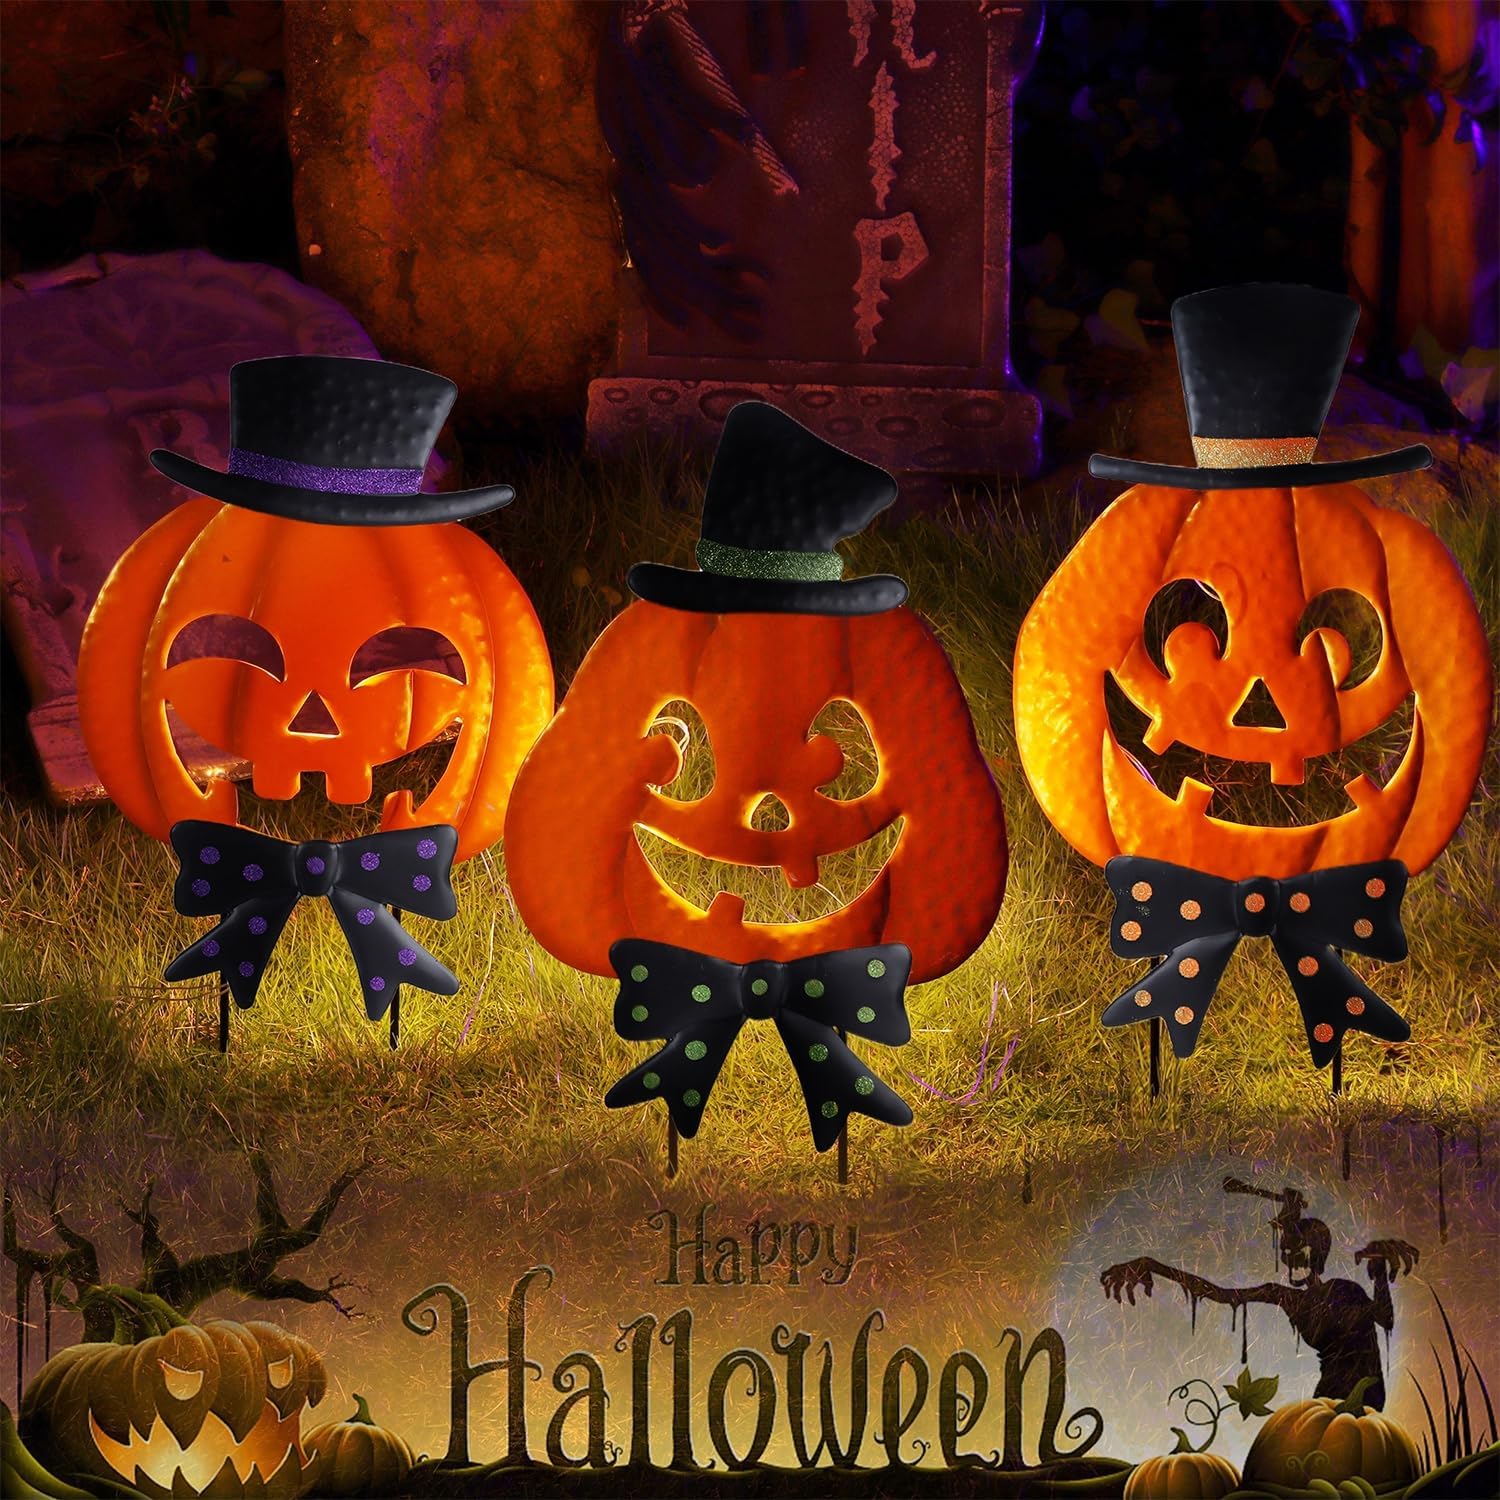 Juegoal 3 Pack Halloween Lighted Pumpkin Garden Stakes, Light Up Metal Jack-o-Lantern with Witch Hat, Outdoor Halloween Yard Signs Battery Powered & Timer, Decorative Pumpkin Figurine for Lawn Pathway